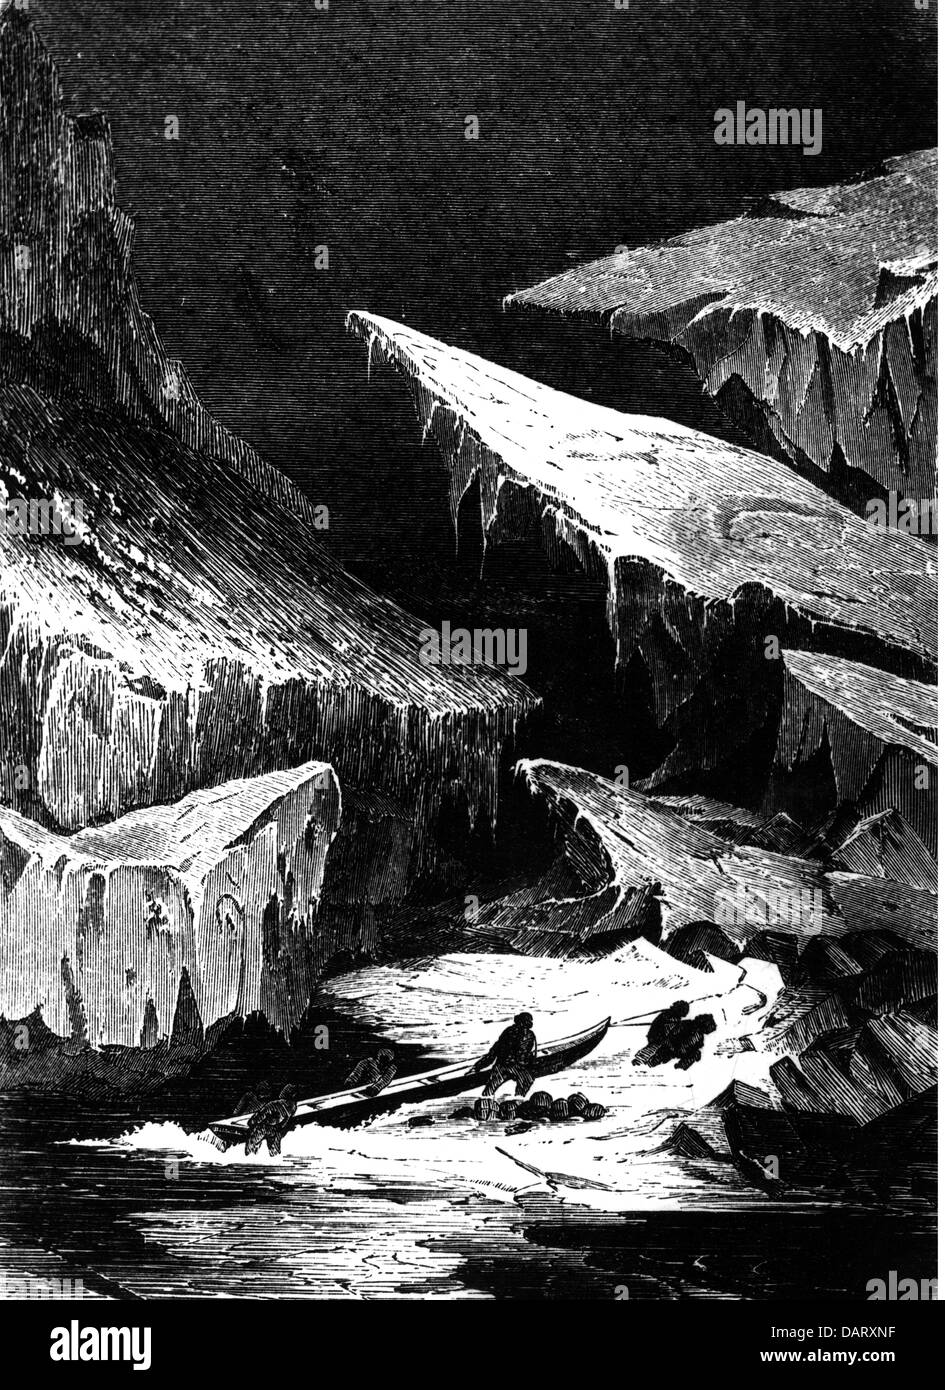 Richardson, John, 5.11.1787 - 5.6.1865, British physician and natural scientist, boating in the polar sea during the search for John Franklin, 1848 - 1849, wood engraving, 19th century, Stock Photo